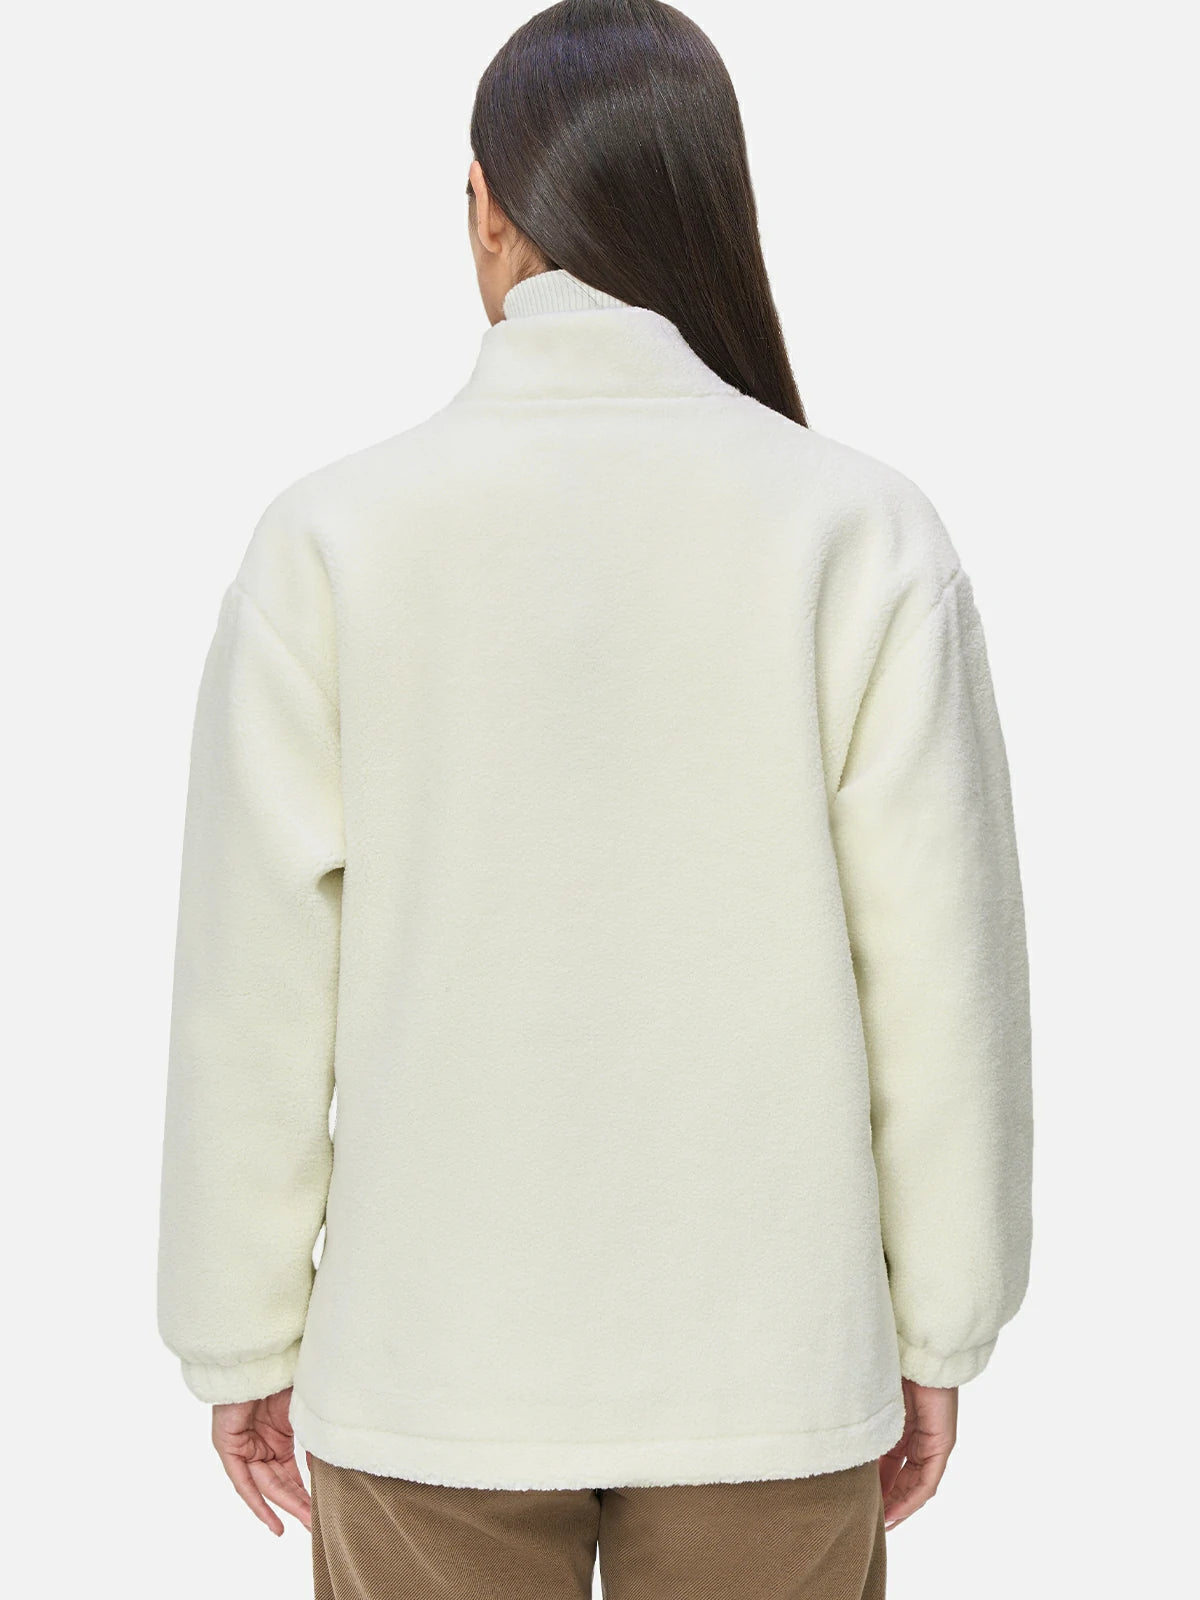 Refined Symmetry: Fleece Jacket with Symmetrical Pockets and Buttons